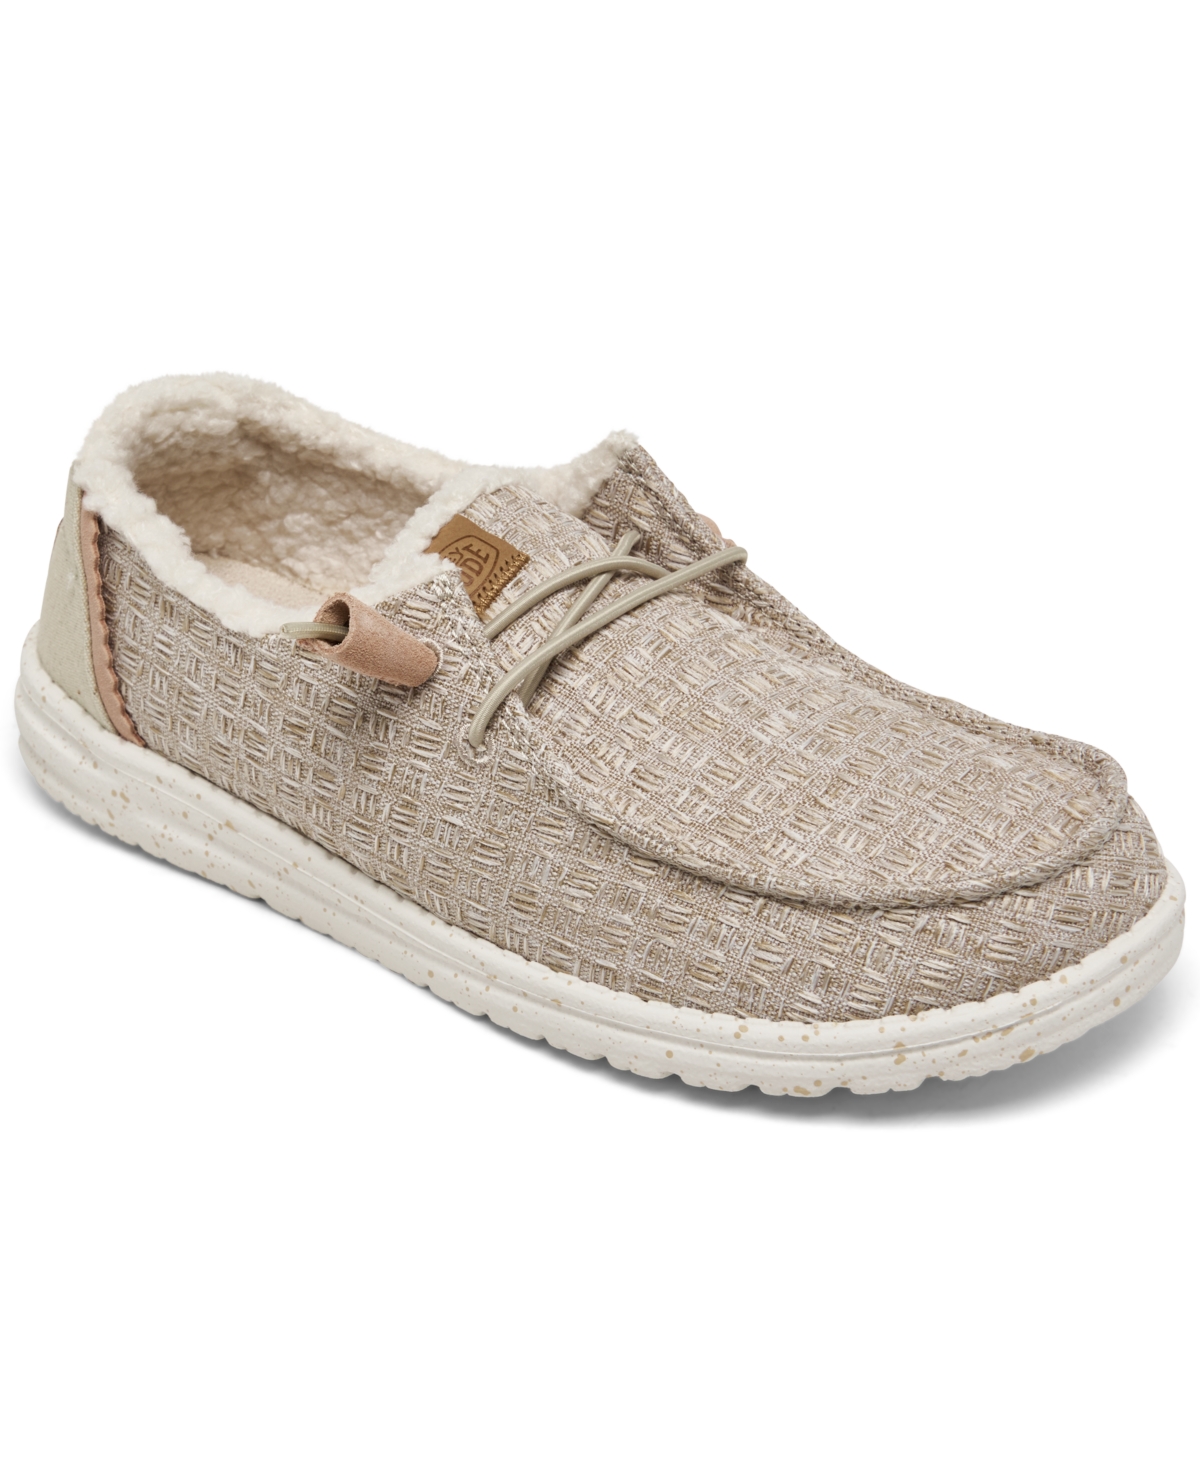 Women's Wendy Warmth Slip-On Casual Sneakers from Finish Line - Natural